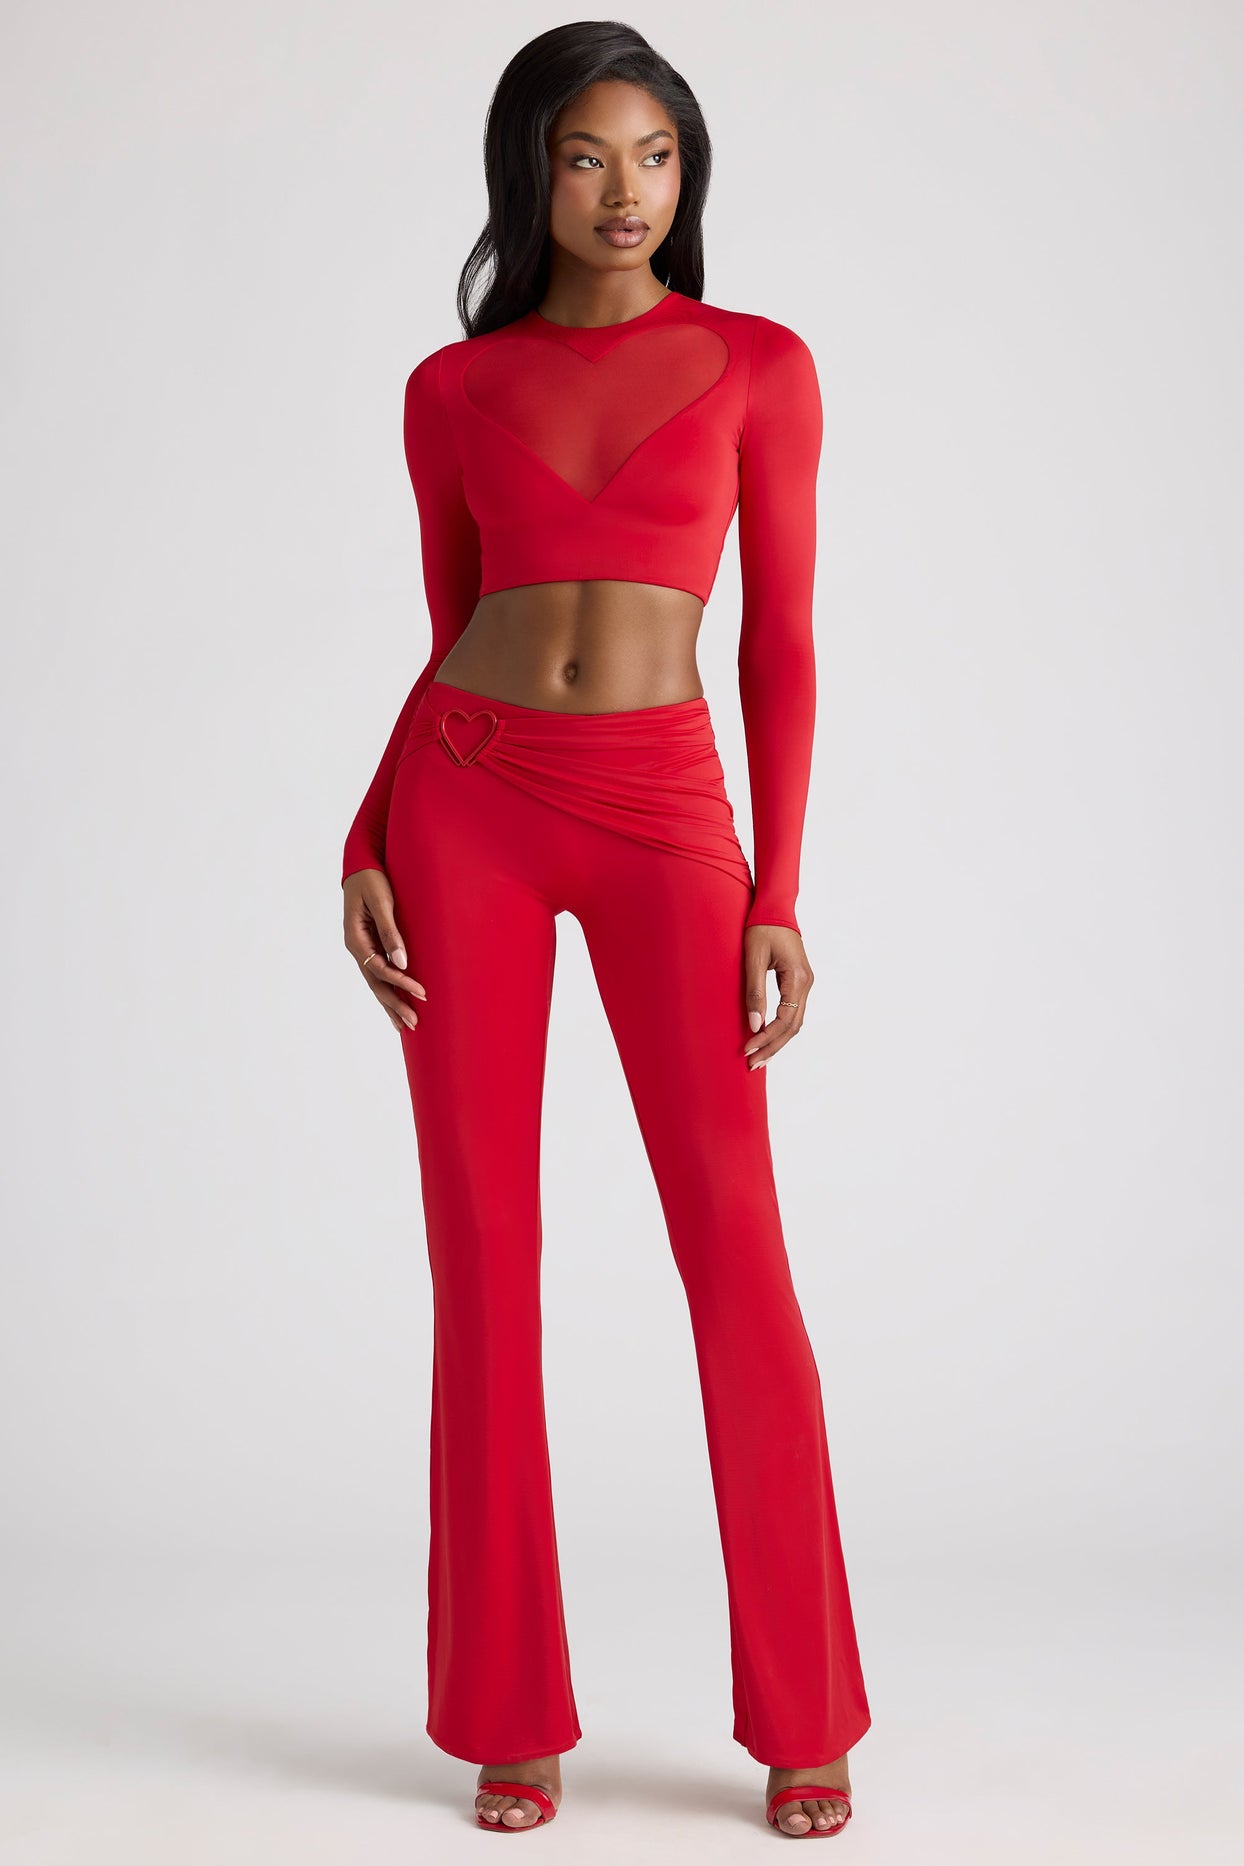 Solea Sheer Panelled Long Sleeve Crop Top in Fire Red | Oh Polly